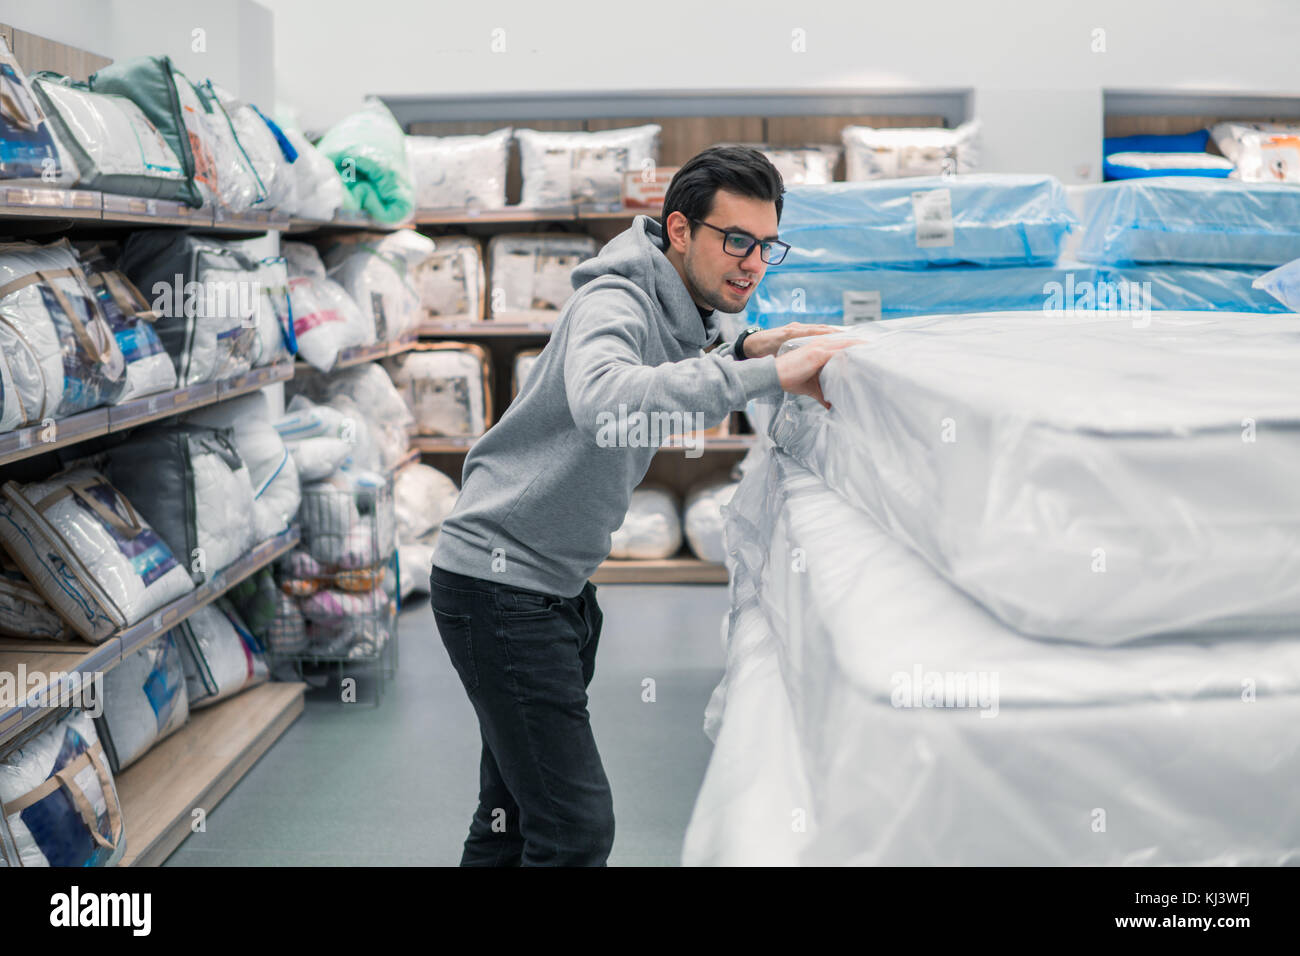 Customer man chooses bed linen in the supermarket mall store. Stock Photo